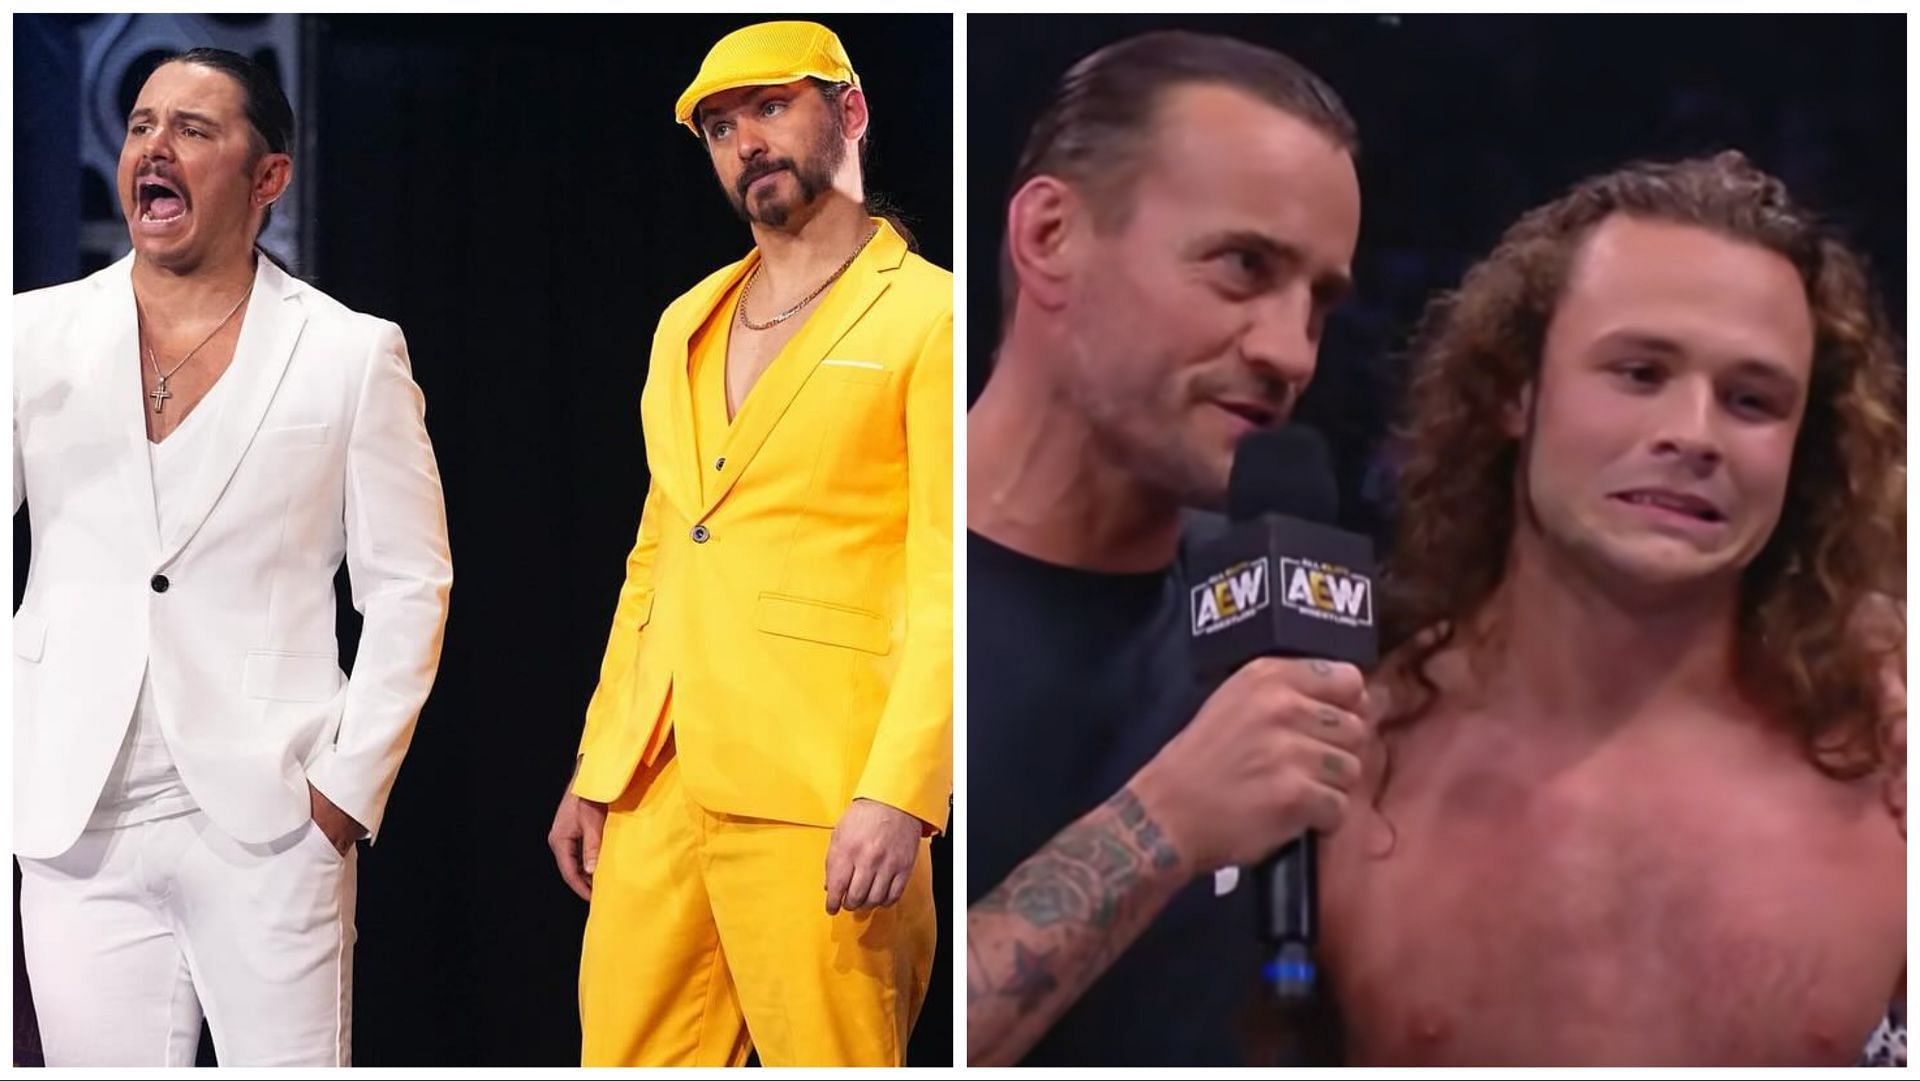 The Young Bucks on AEW Dynamite, CM Punk and Jack Perry on AEW Dark